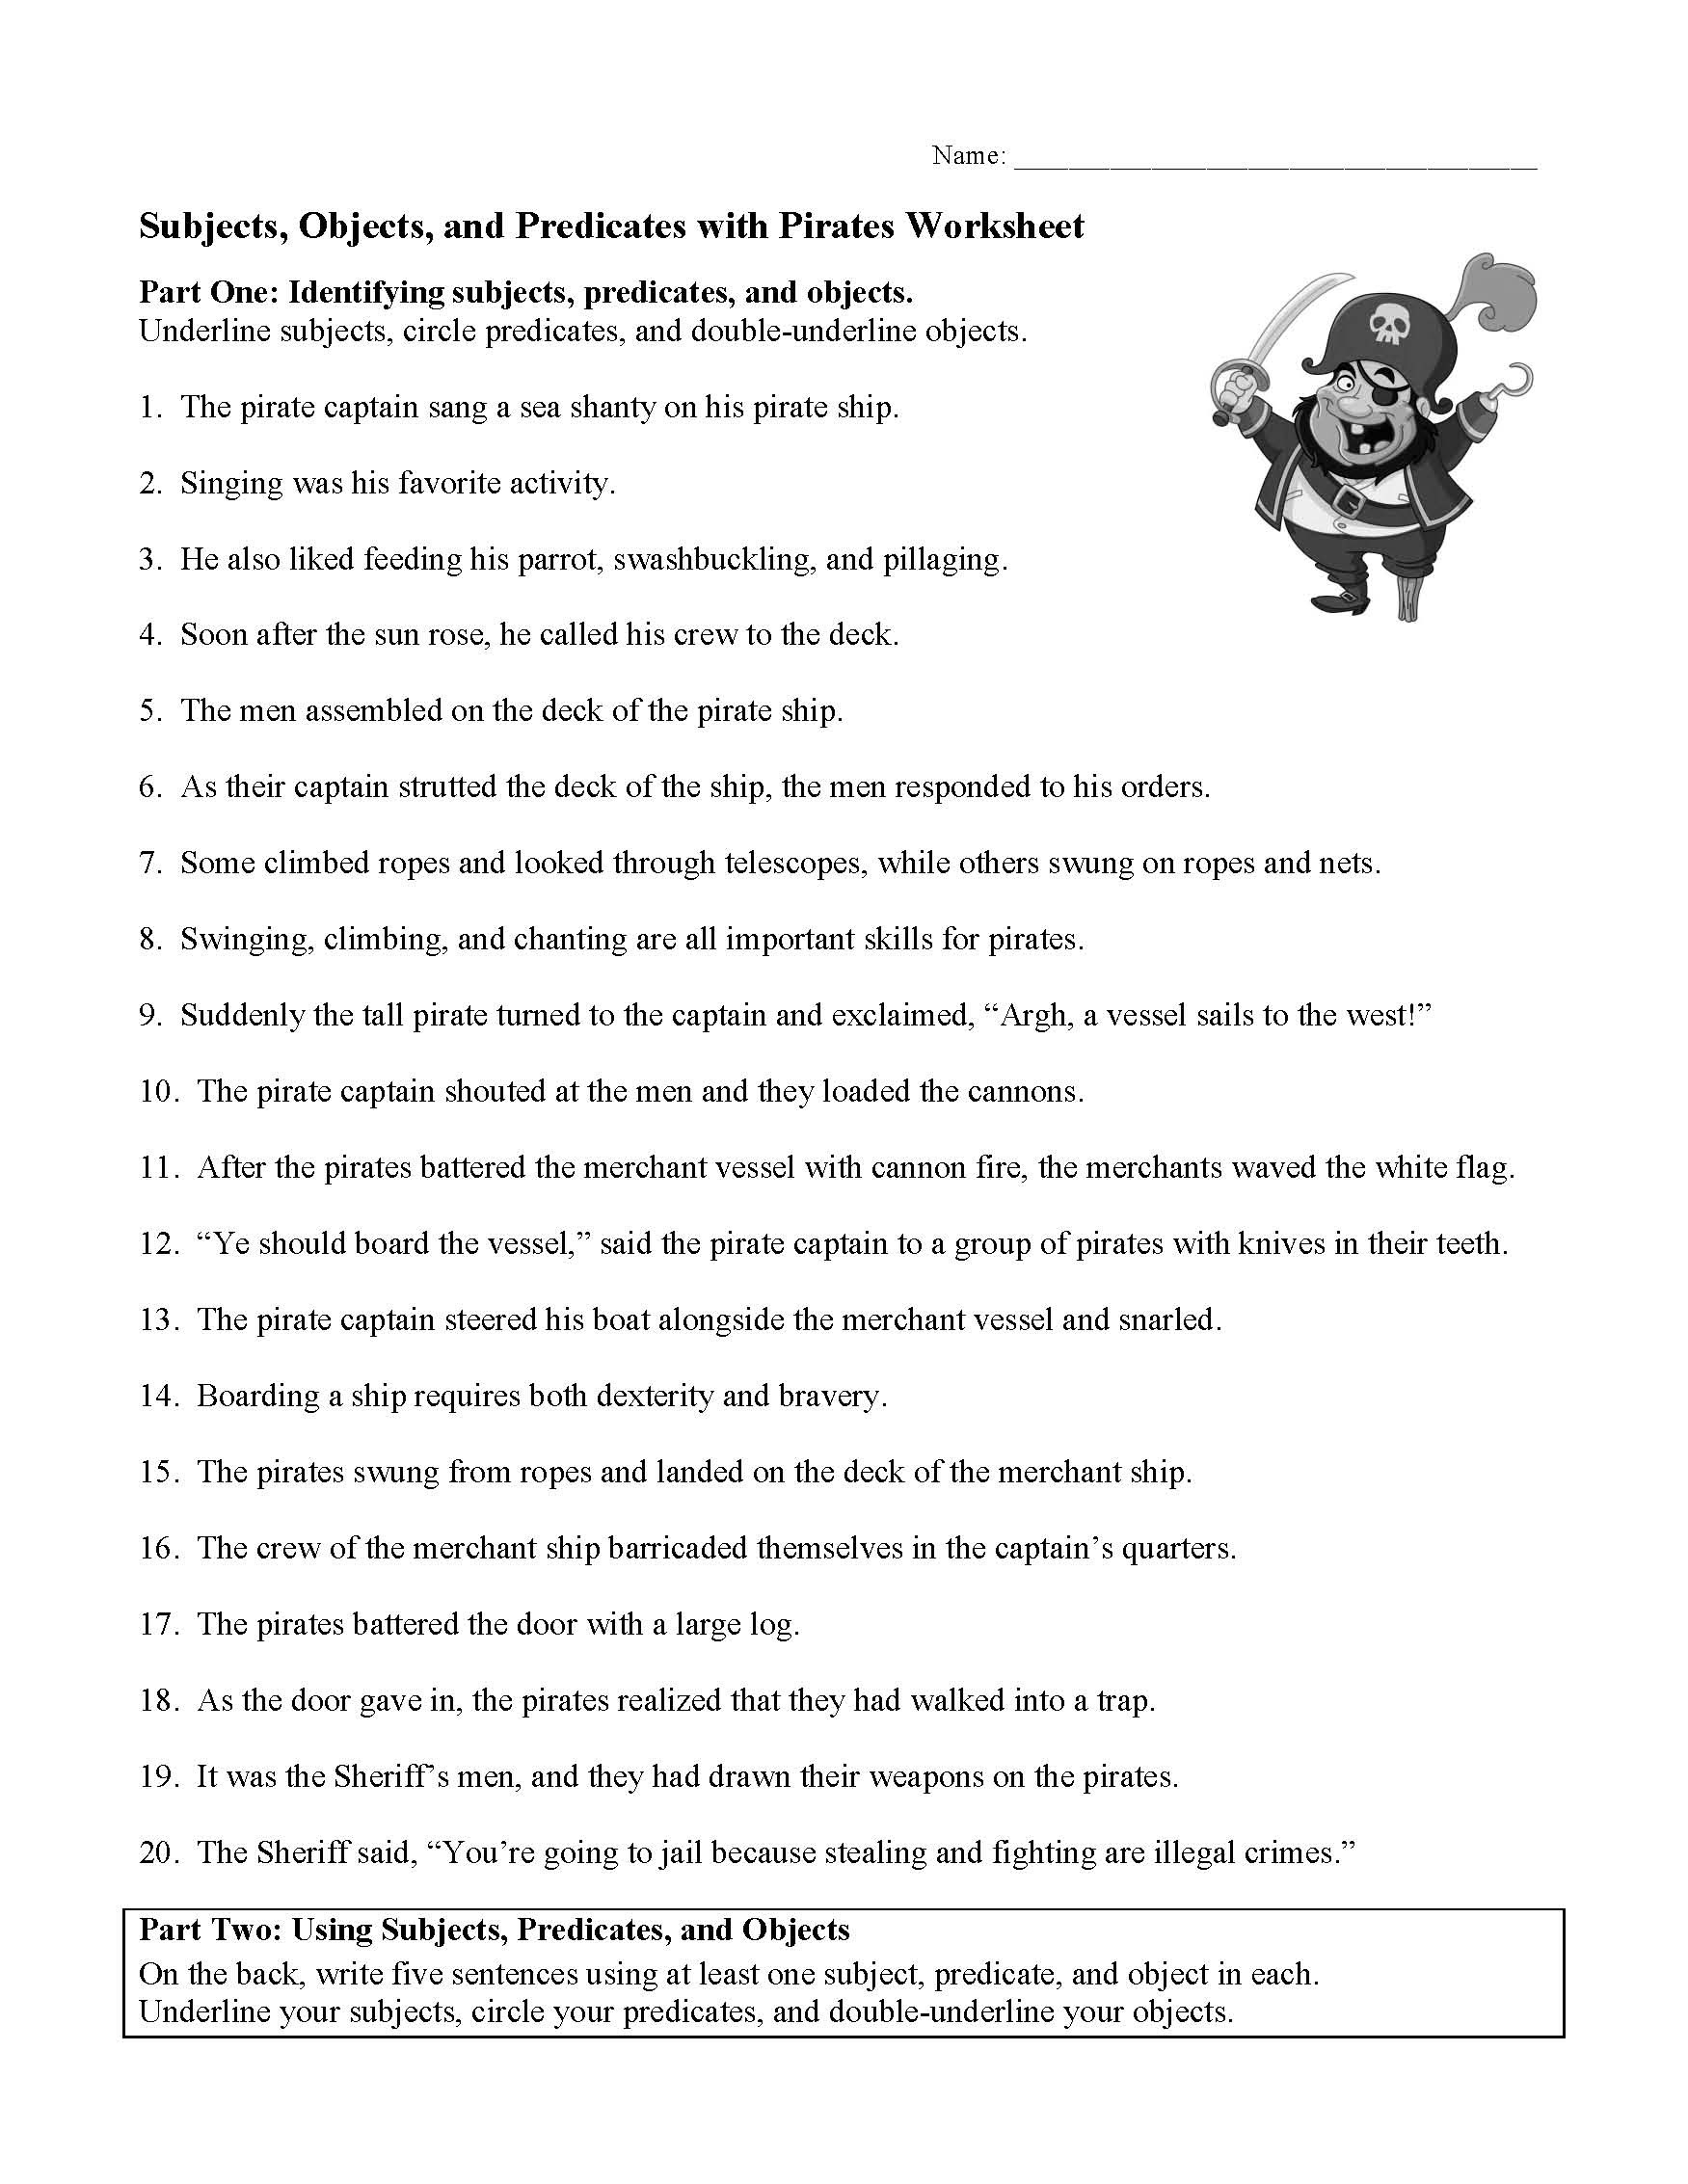 Subjects Objects And Predicates With Pirates Worksheet db excel com